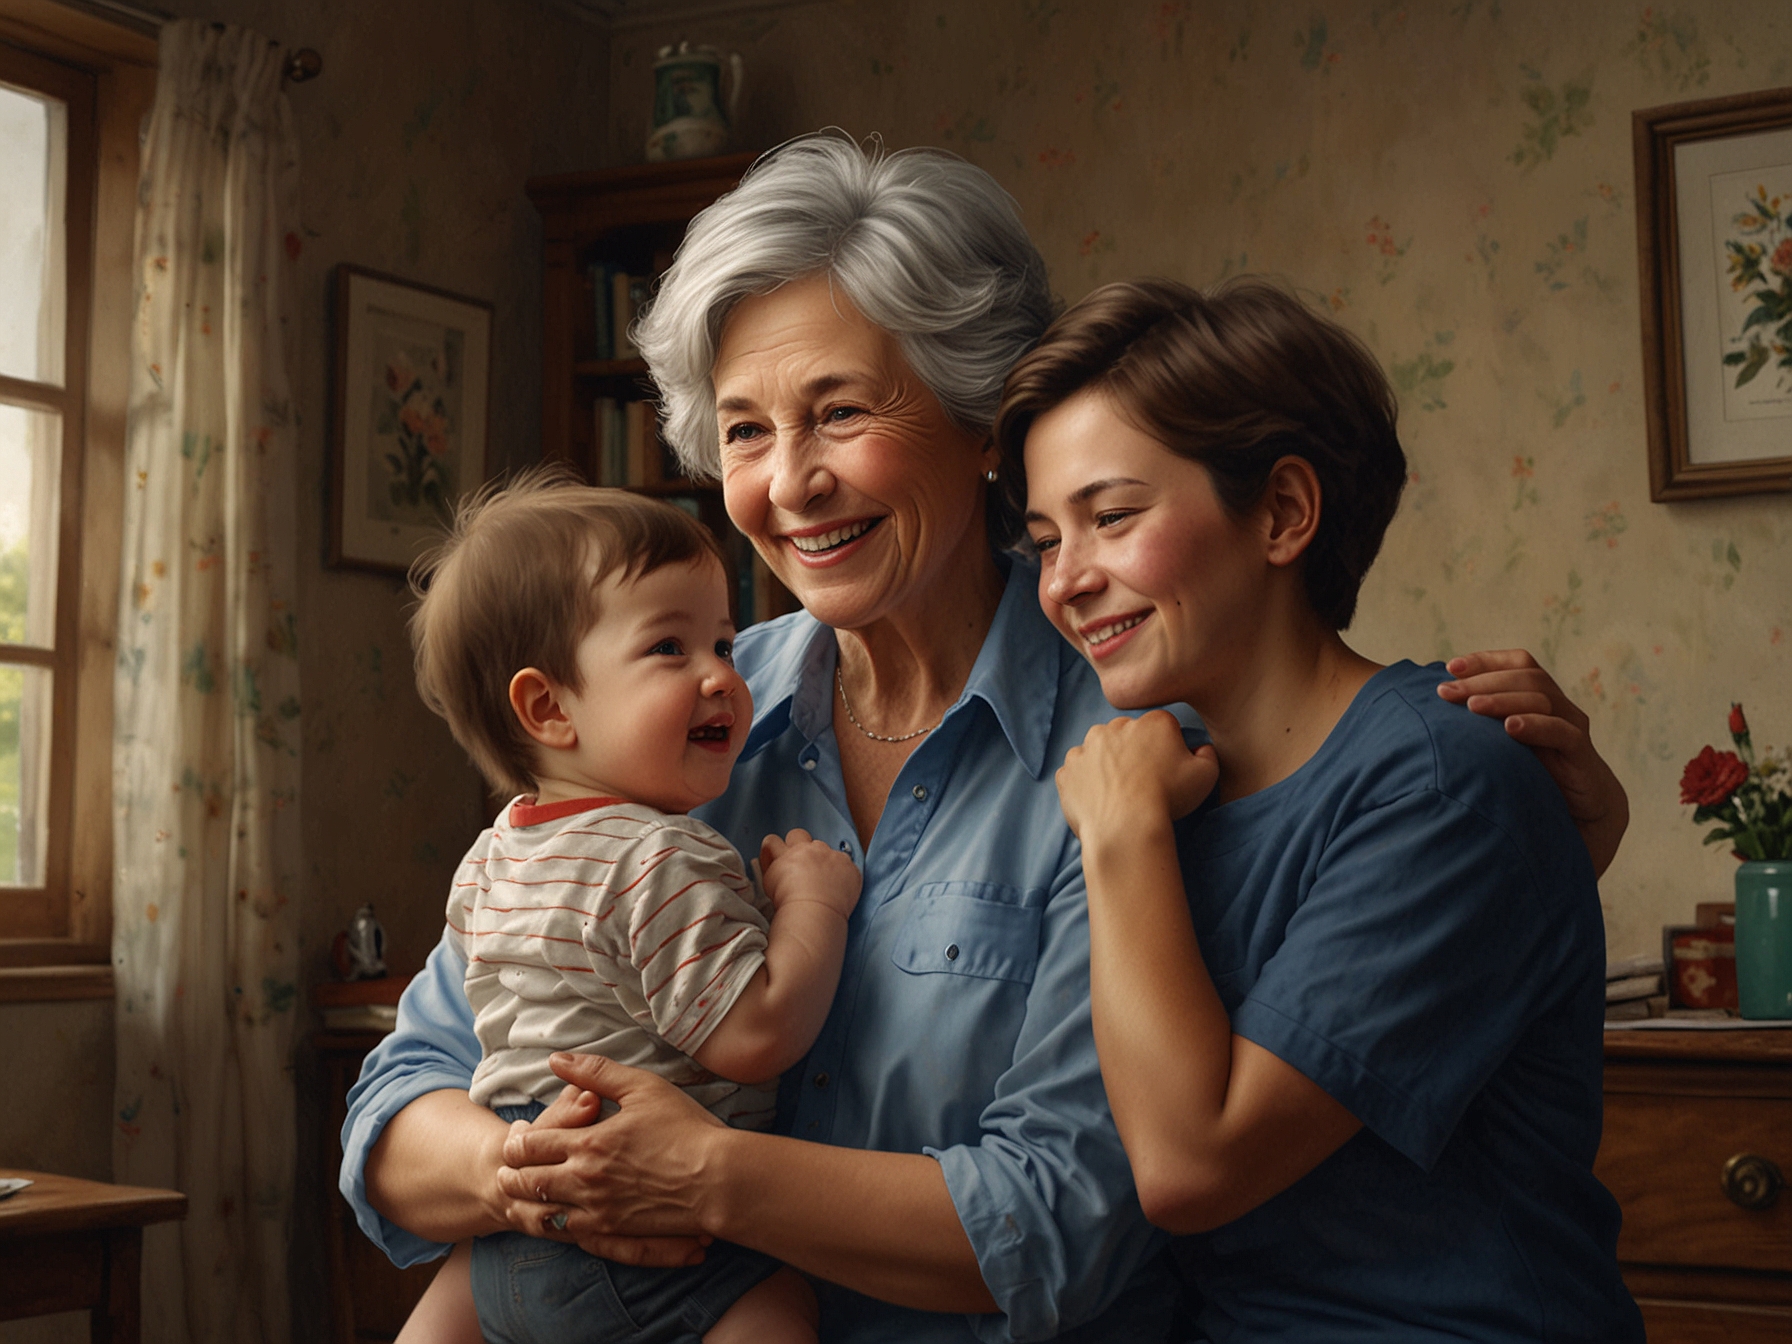 Theresa Nist, surrounded by her supportive family members, embraces her new role as a grandmother, showcasing moments of love and the strengthened family bonds this new addition has brought.